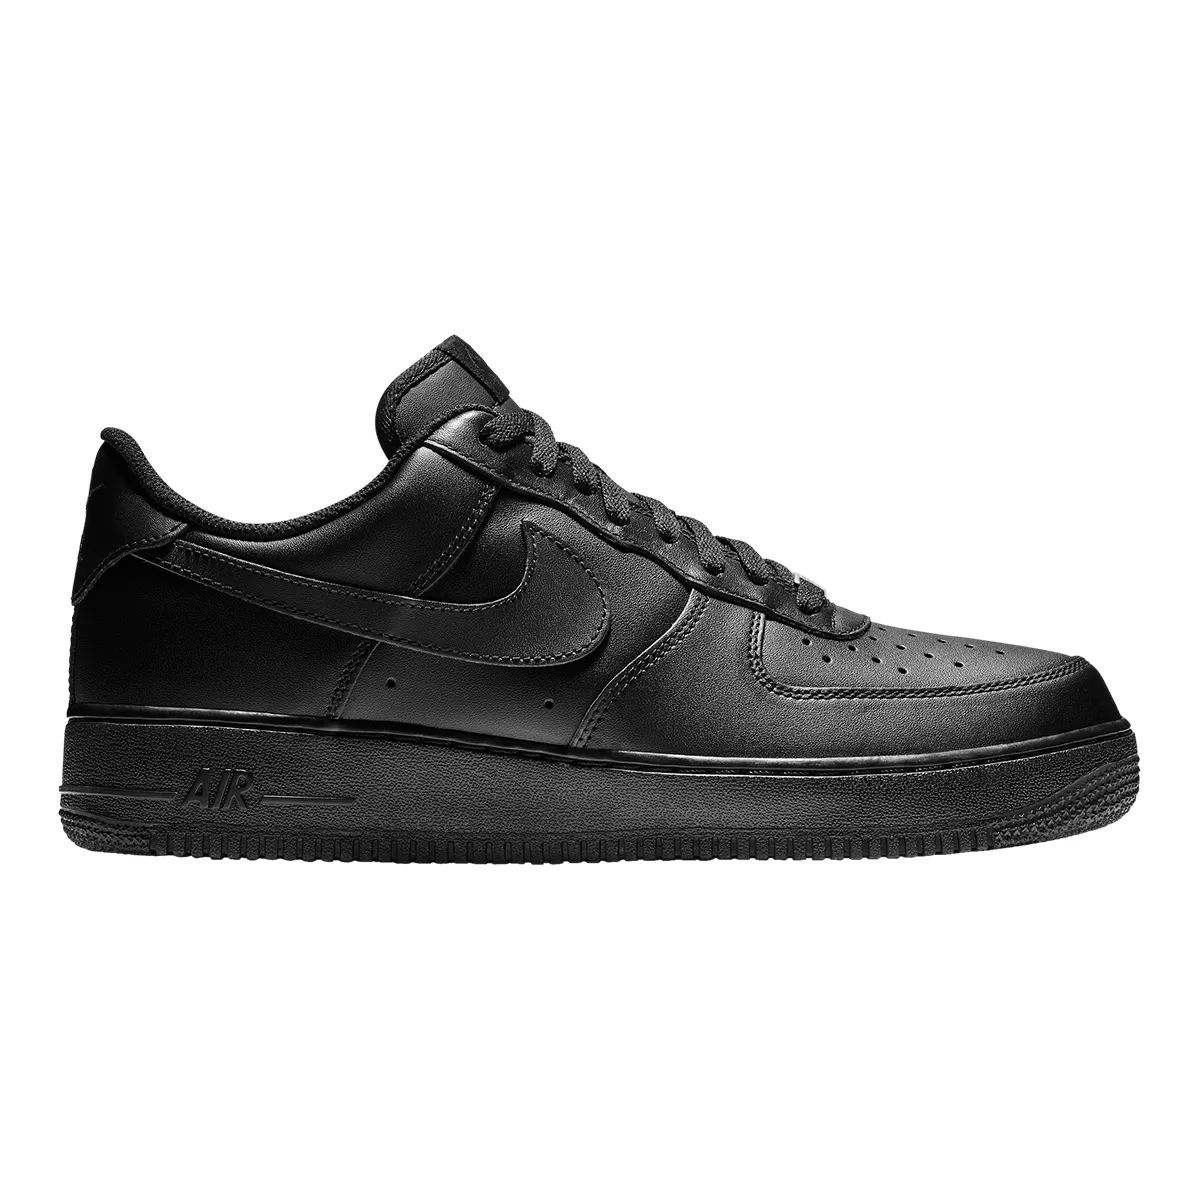 Nike Men's Air Force 1 '07 Shoes  Sneakers Low Top Basketball